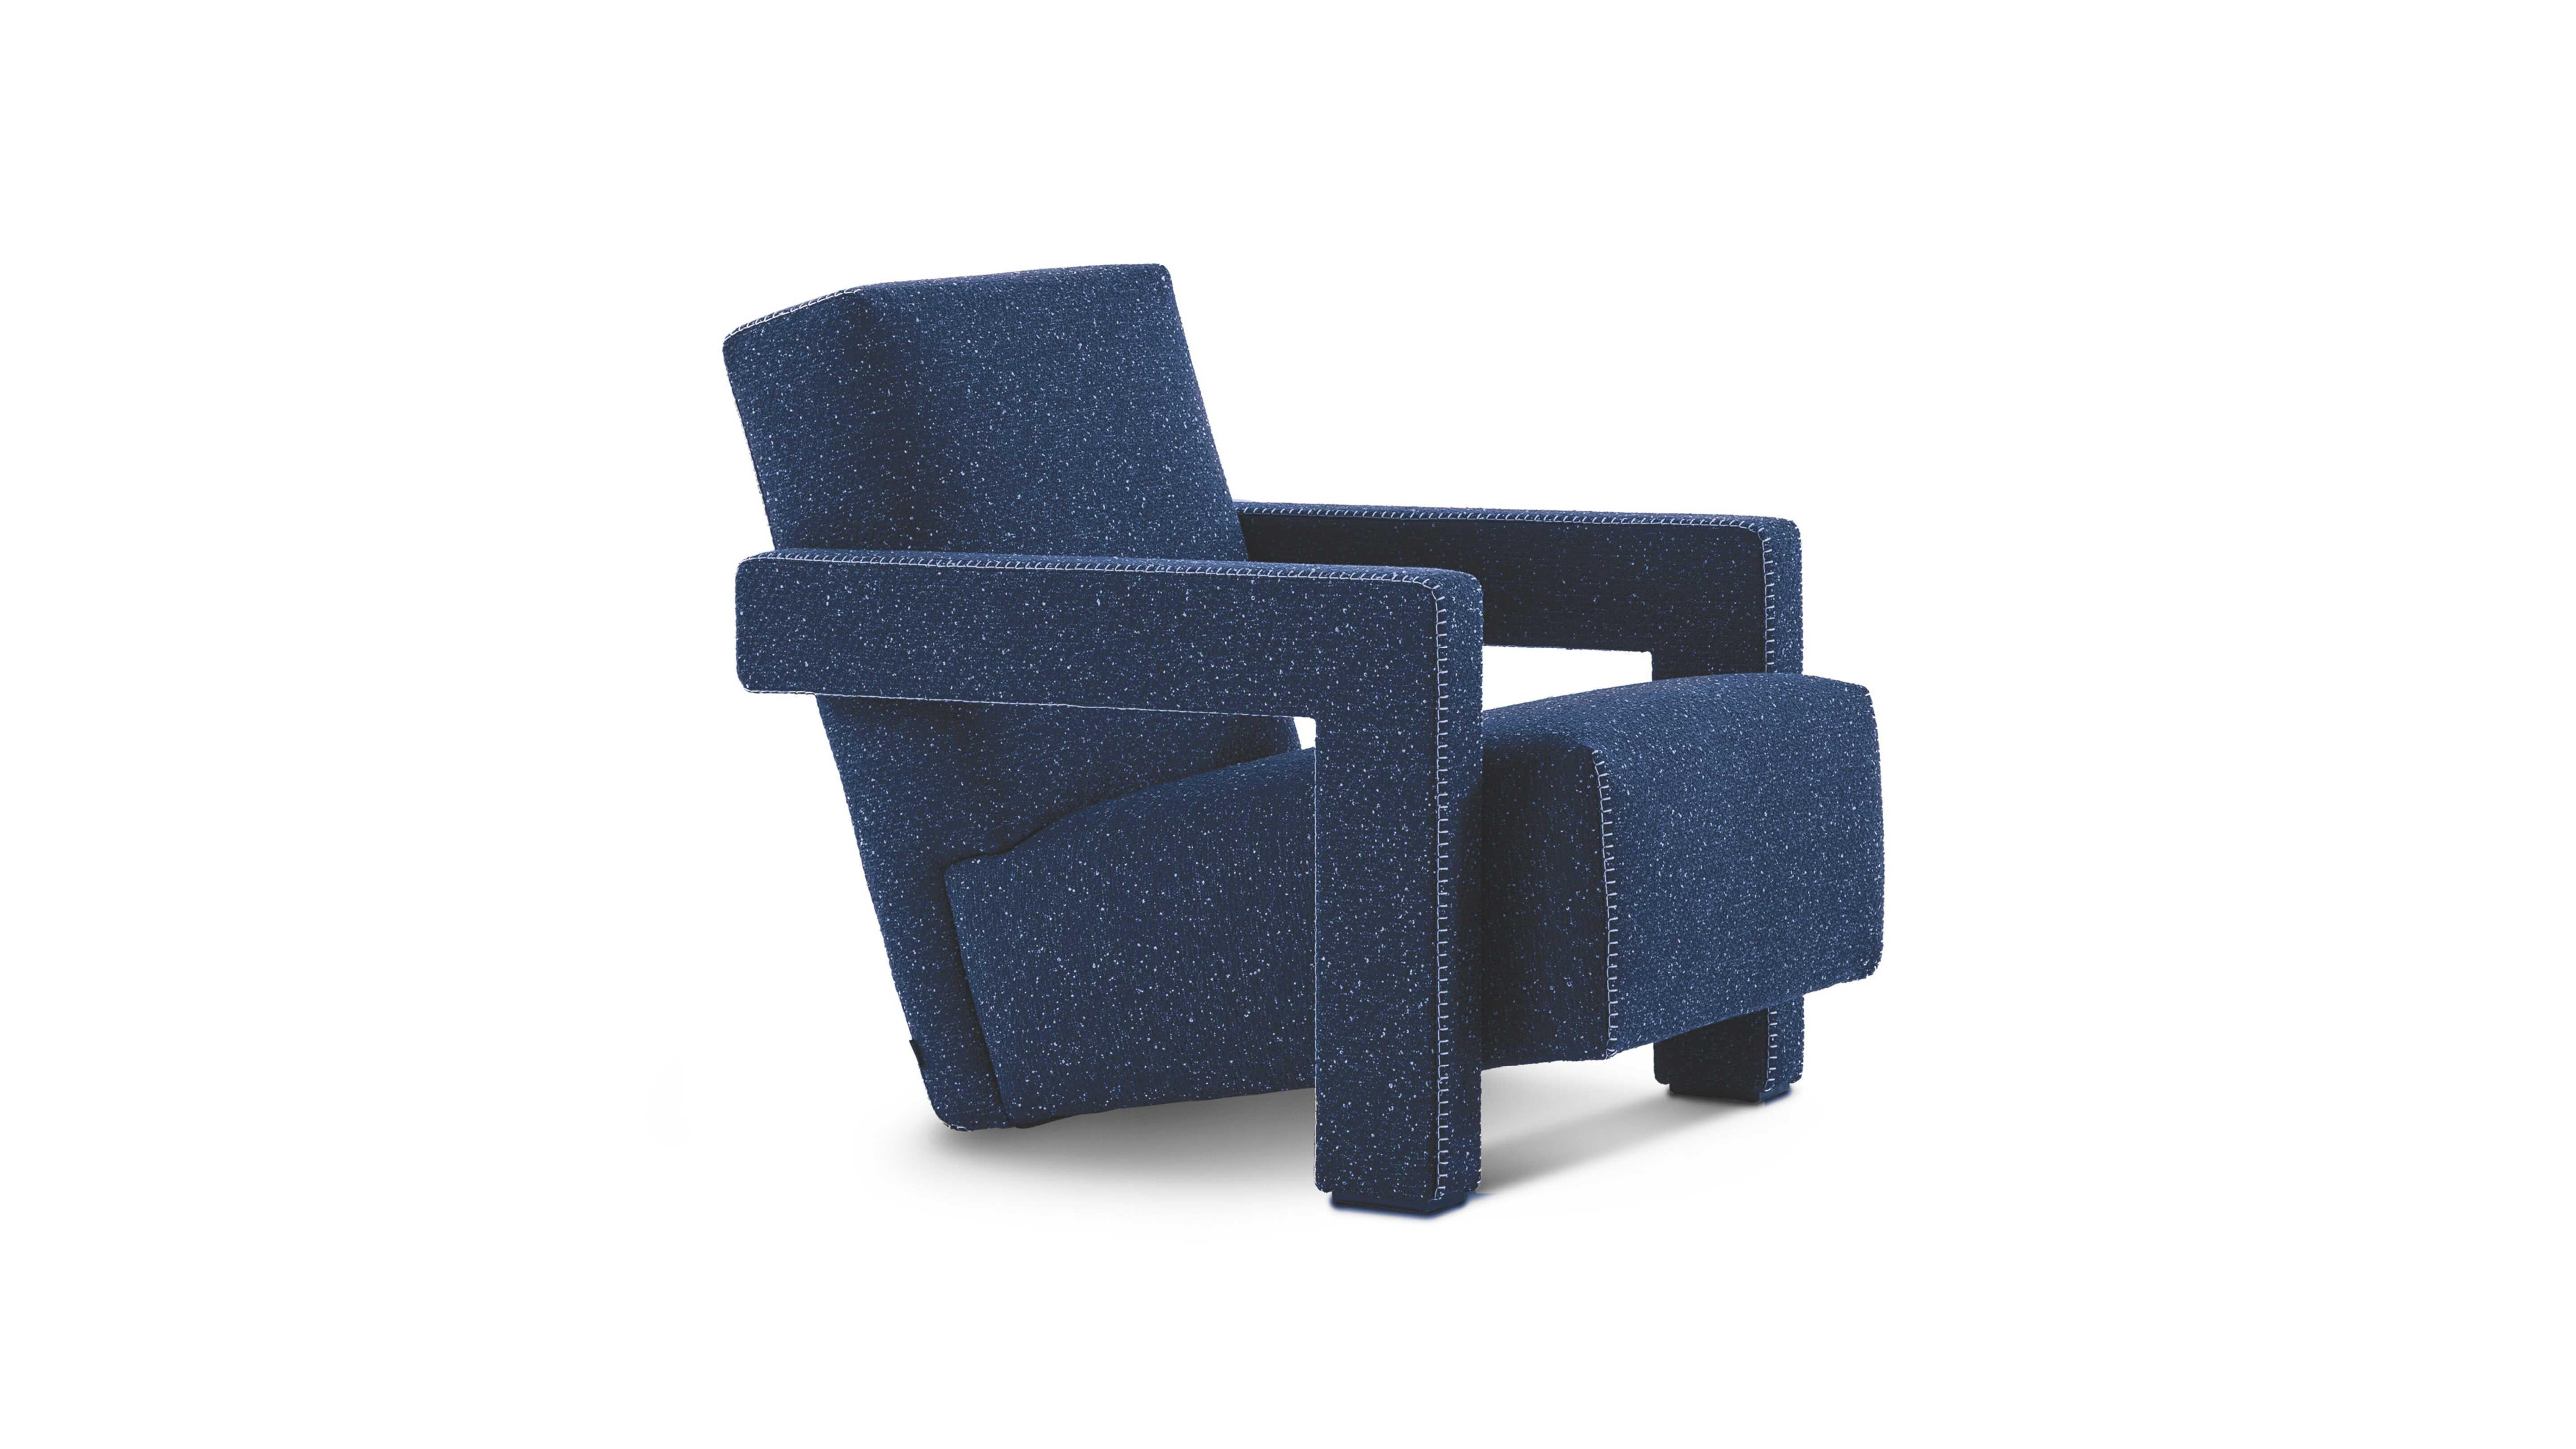 Prices vary dependent on the chosen color and size of the chair. Available in three sizes: 

Standard: 64 width, 85 depth, 70 height, 37 seat height
XL: 66 width, 89 depth, 75 height, 39 Seat height
Baby: 46 width, 57 depth, 50 height, 25 seat